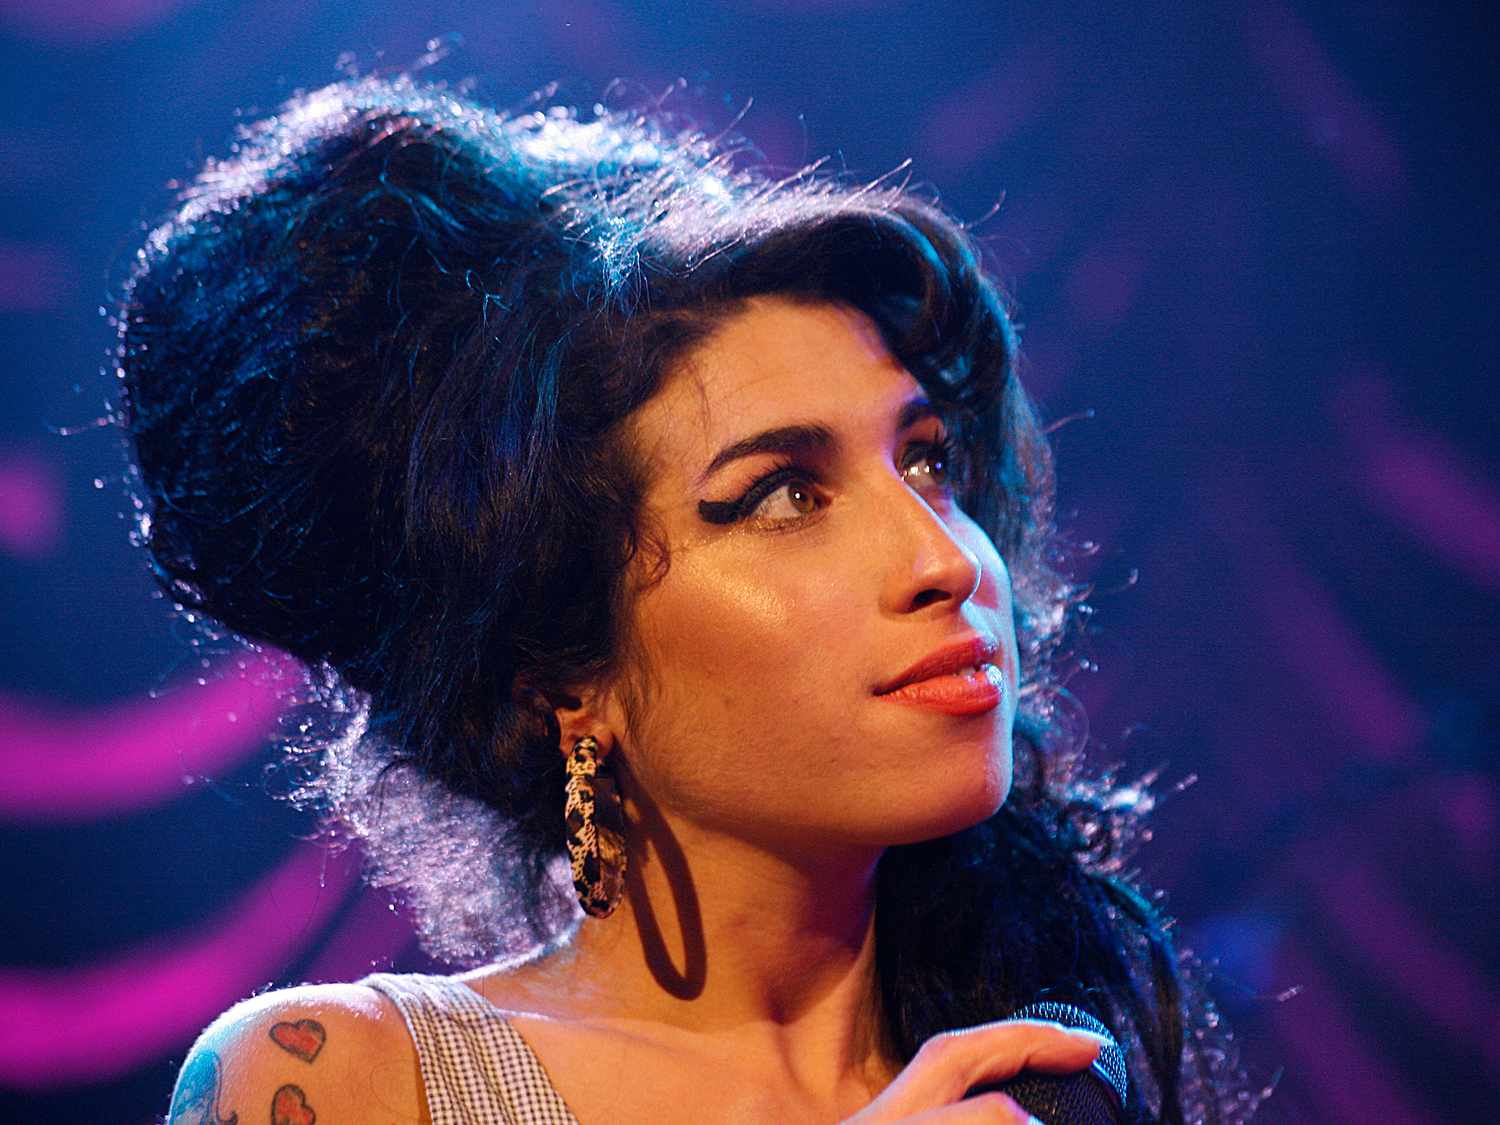 Amy Winehouse being still alive